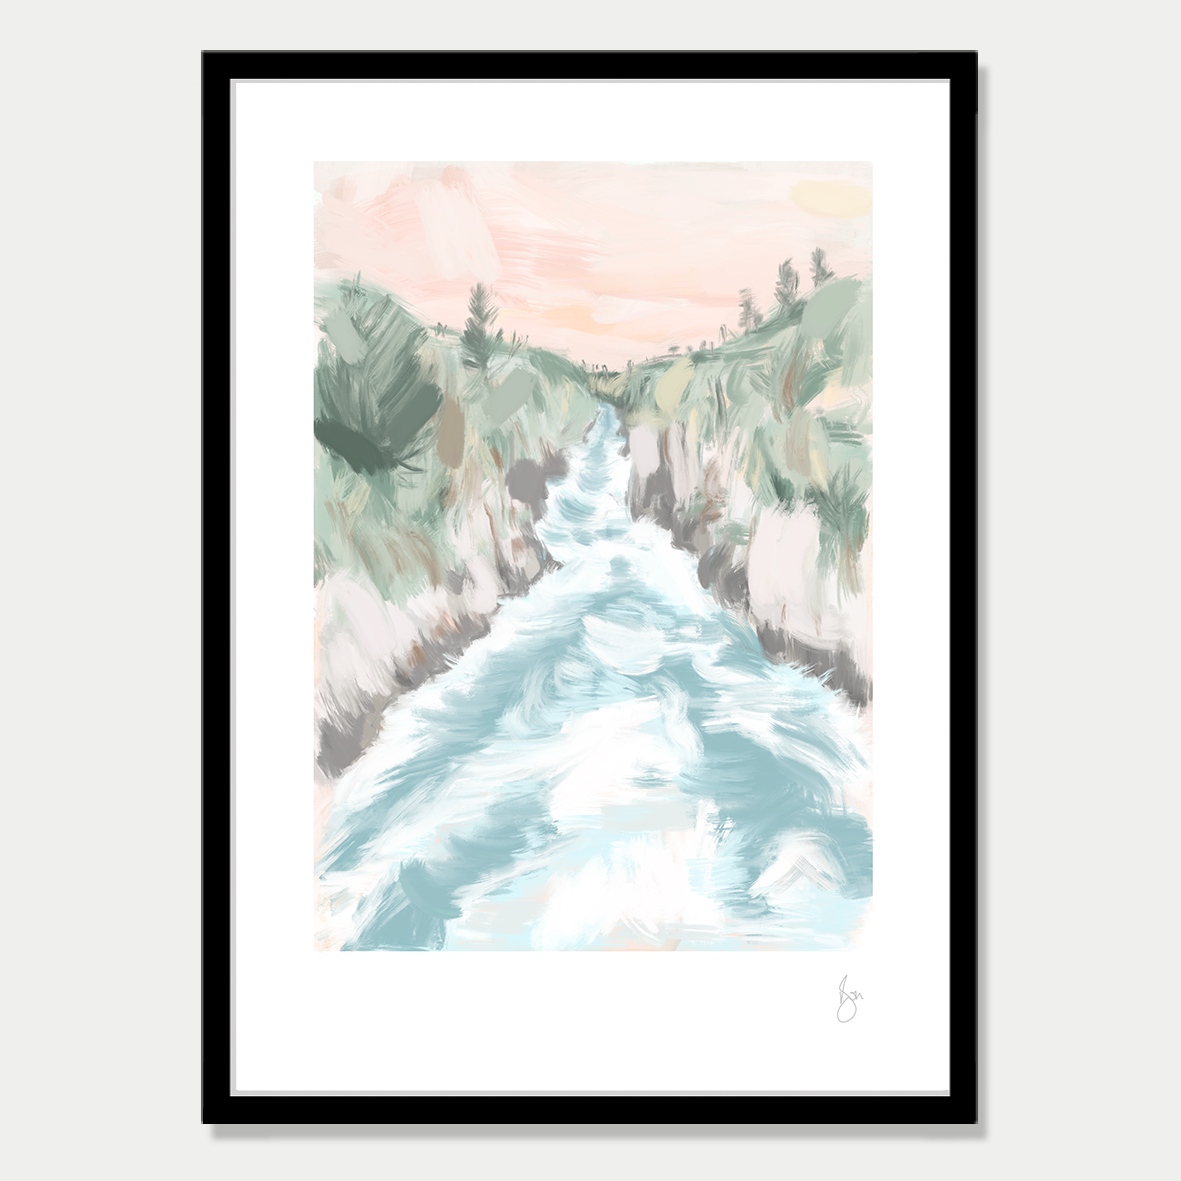 This art print is a still life of a the Huka Falls in New Zealand, by Bon Jung. Printed in New Zealand by endemicworld and framed in black.